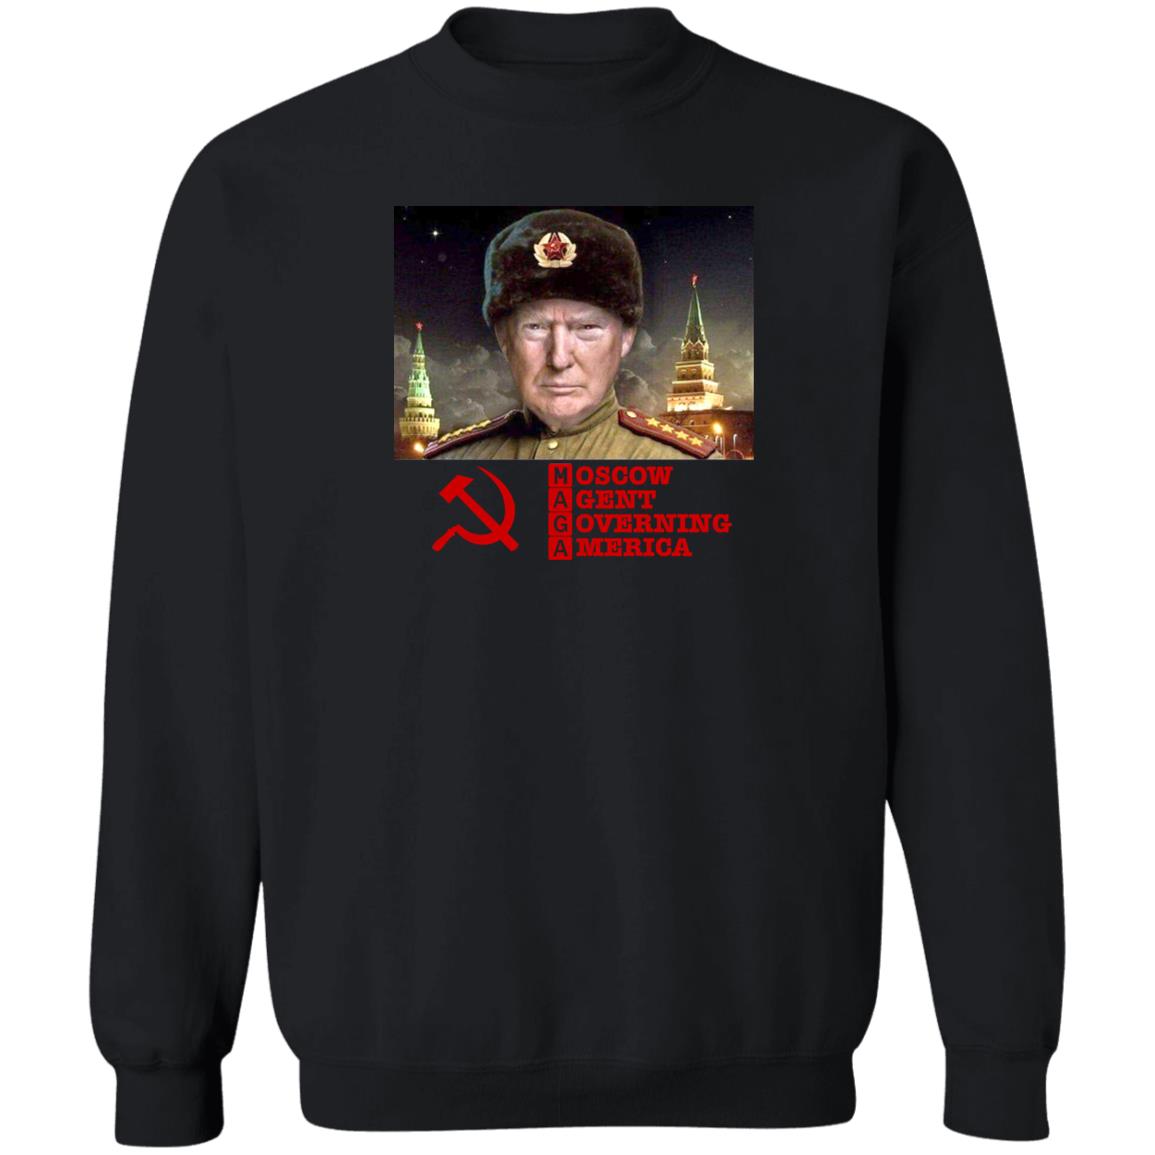 Trump Maga Moscow Agent Governing America Shirt Panetory – Graphic Design Apparel &Amp; Accessories Online